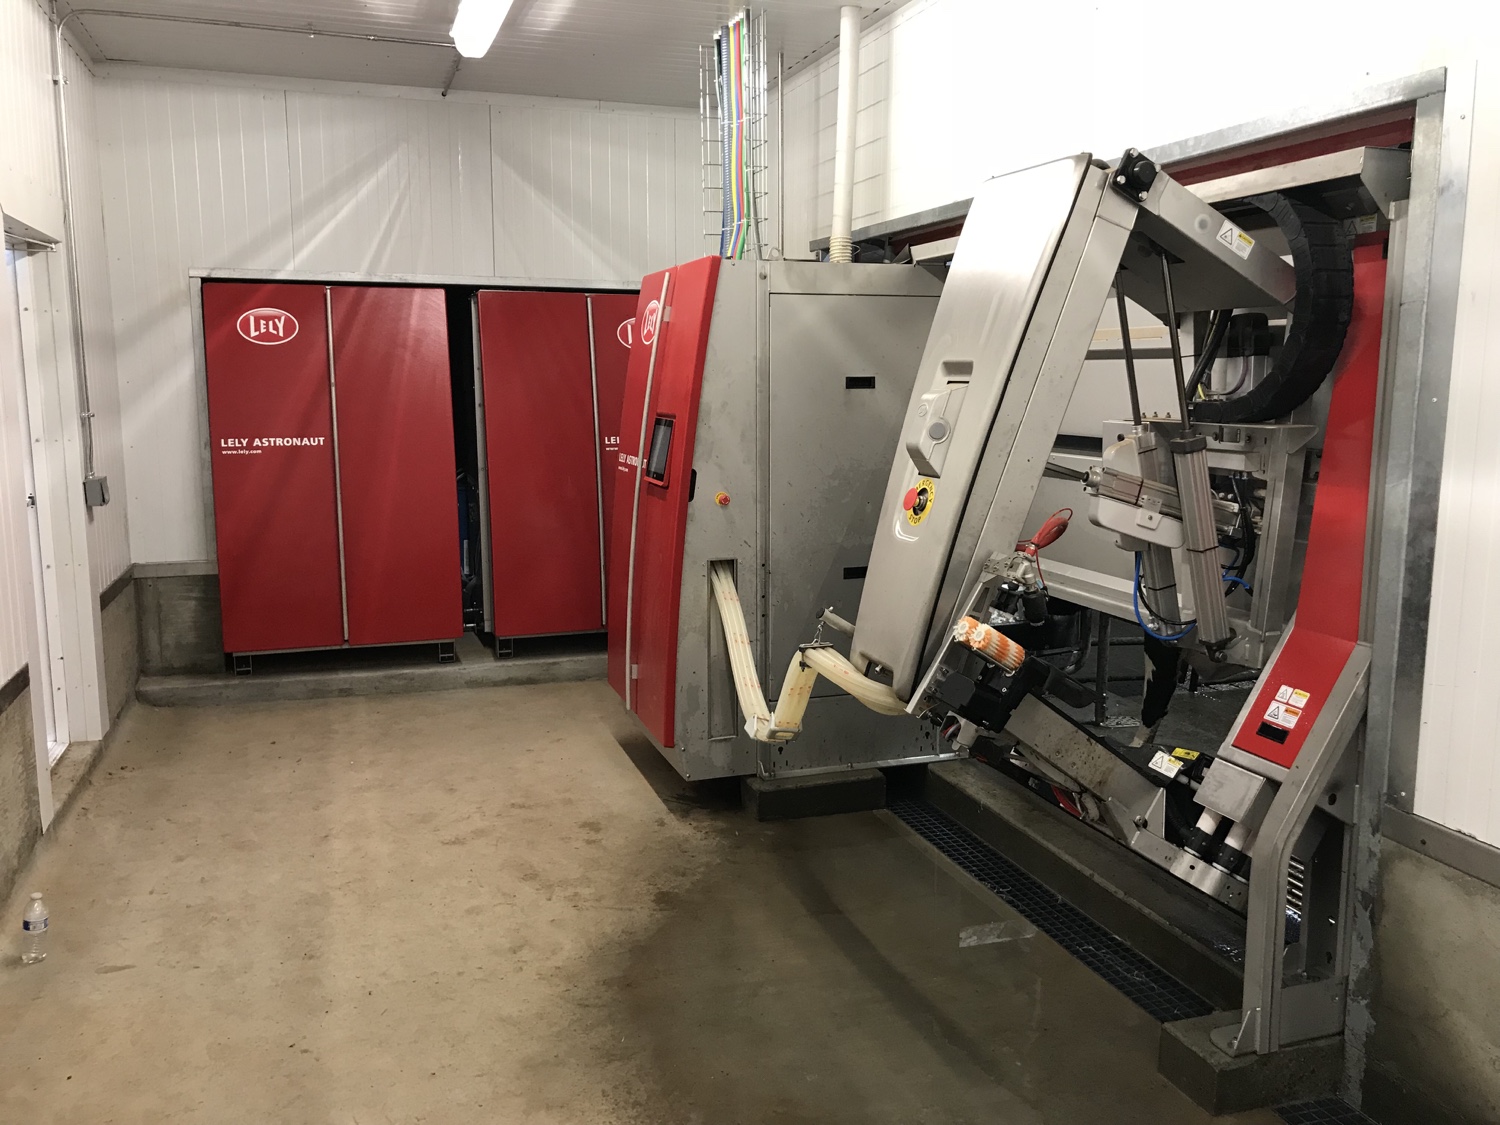 Lely Robot Room with arm extended.jpg